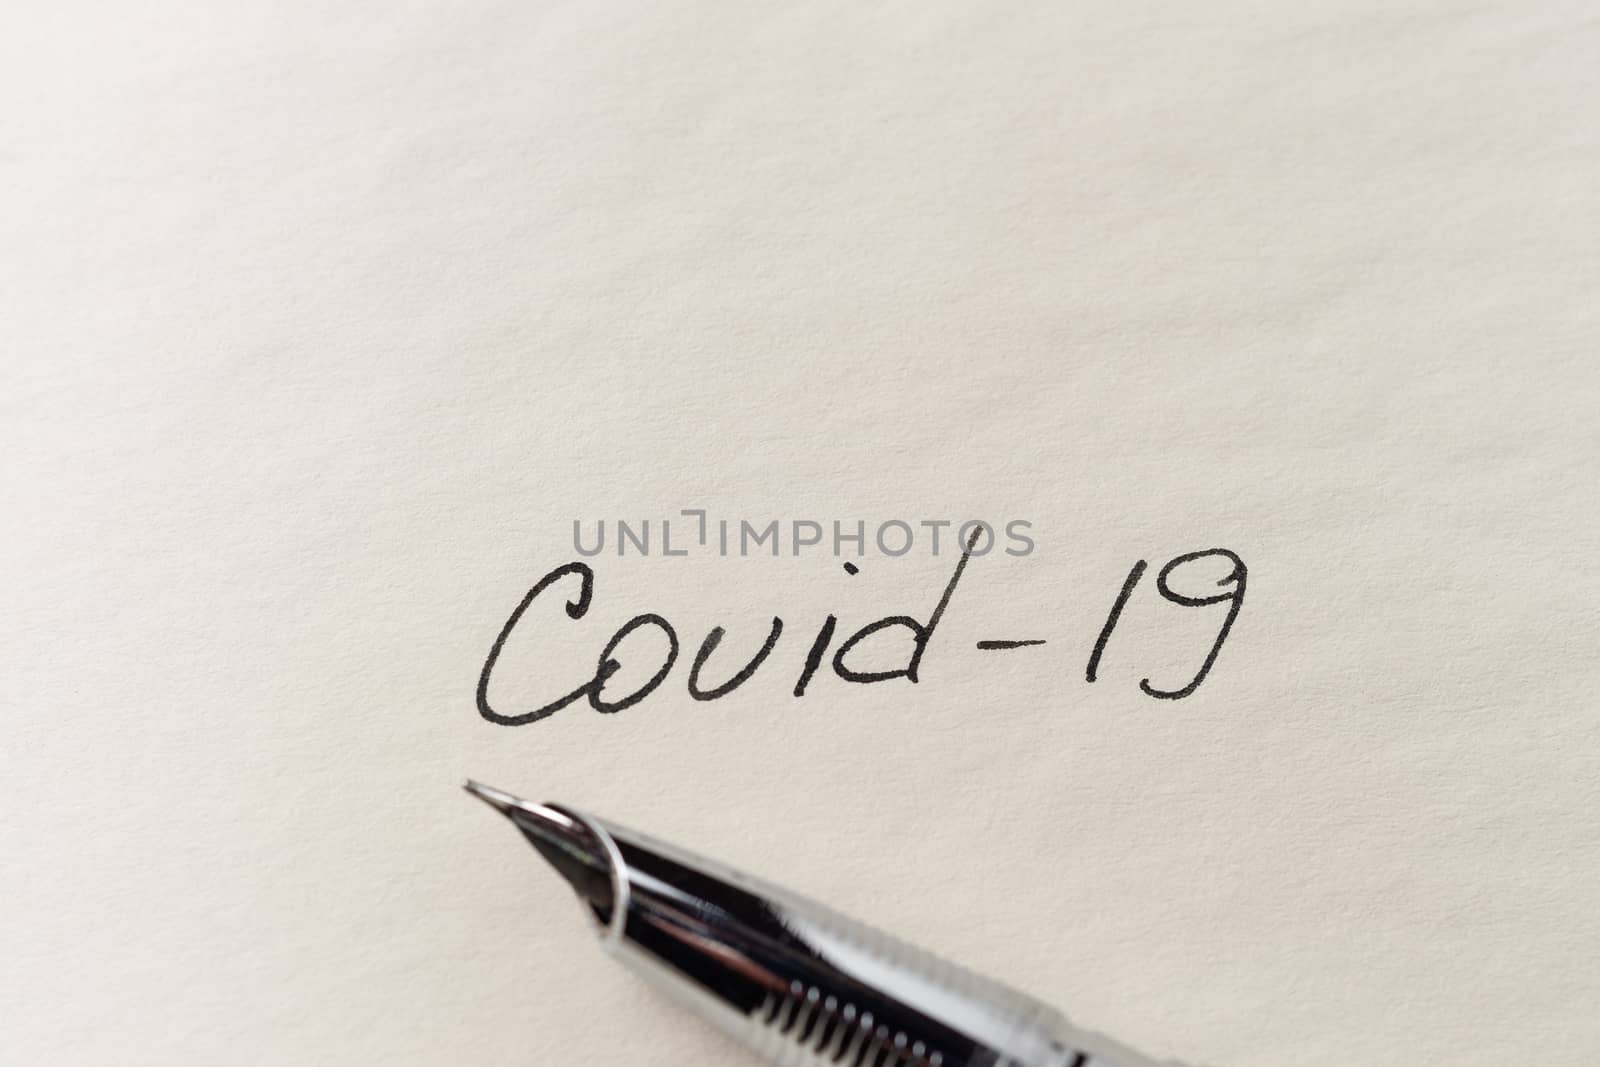 Covid-19 inscription on a blank empty sheet of paper in a notebo by alexsdriver